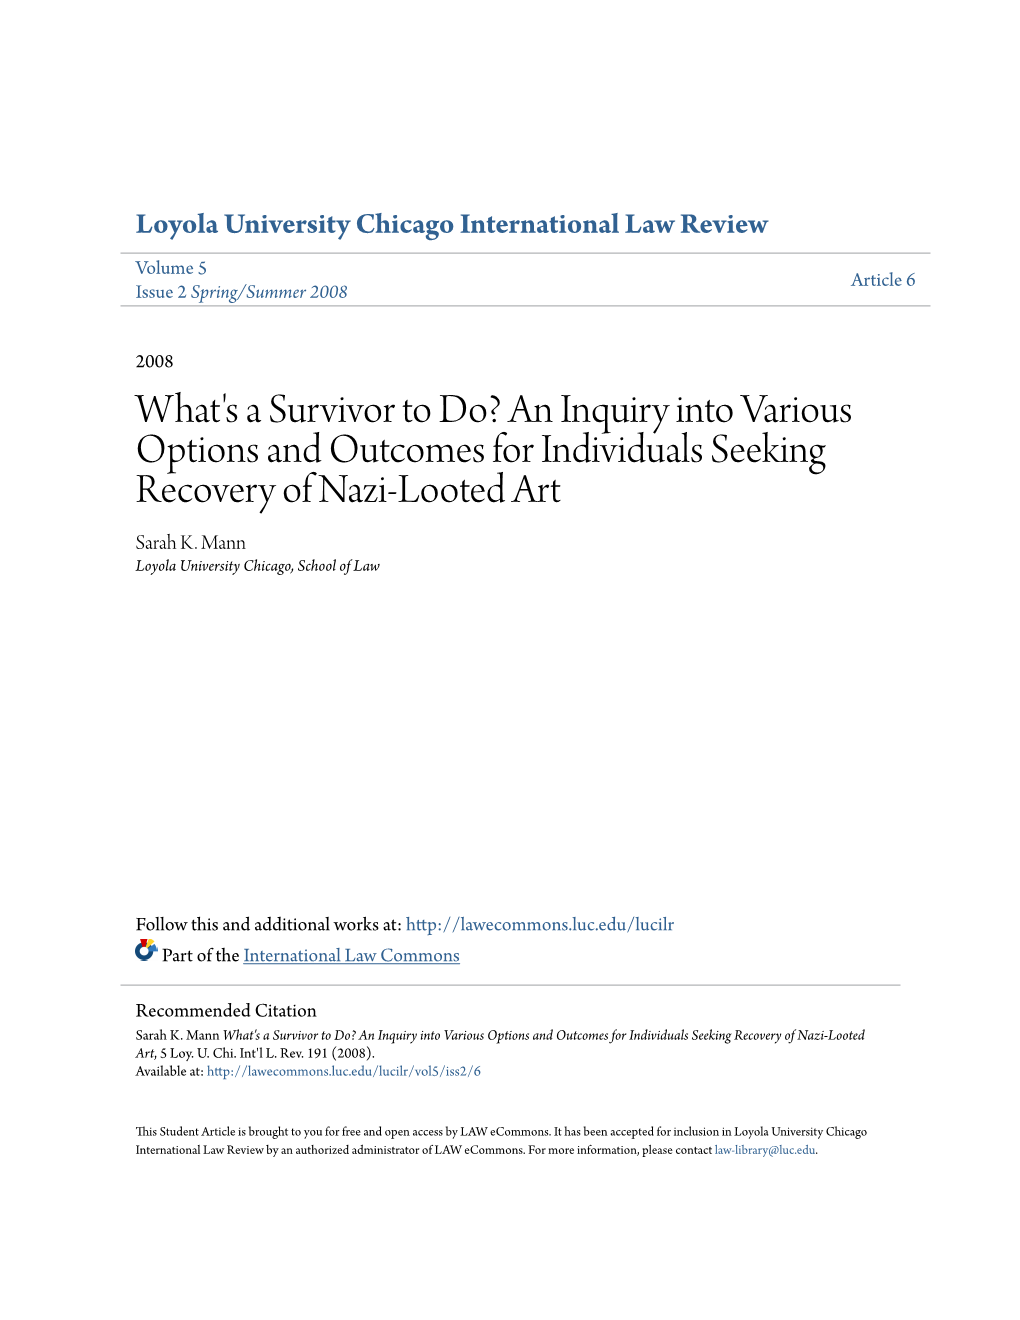 An Inquiry Into Various Options and Outcomes for Individuals Seeking Recovery of Nazi-Looted Art Sarah K